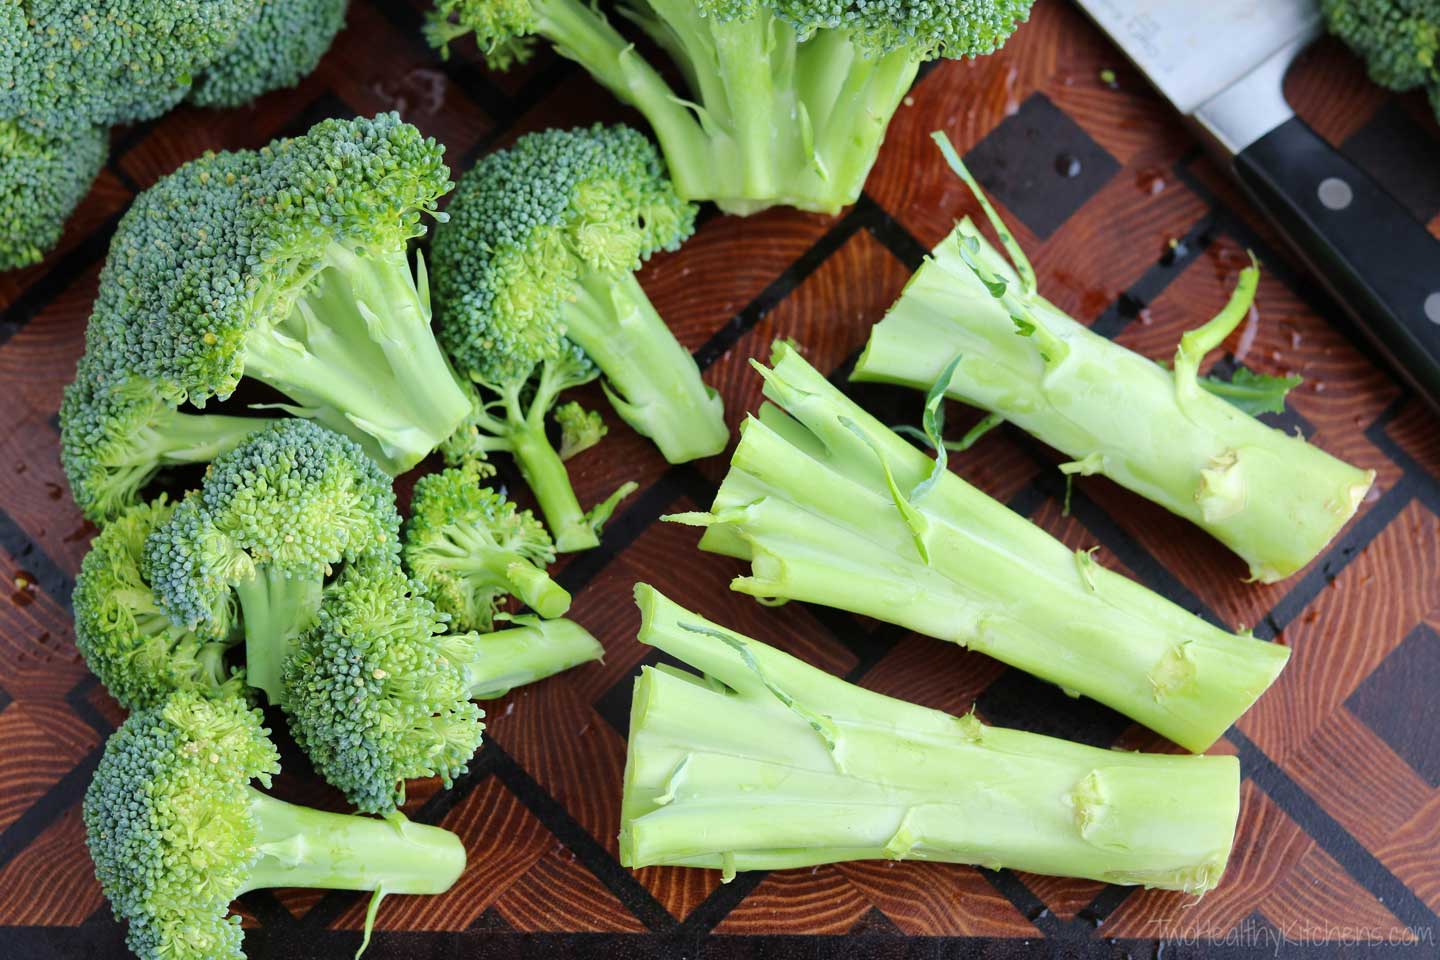 Vegetable stems – like these broccoli stalks – are often thrown away. But wait … there are so many delicious, healthy ways to use them!